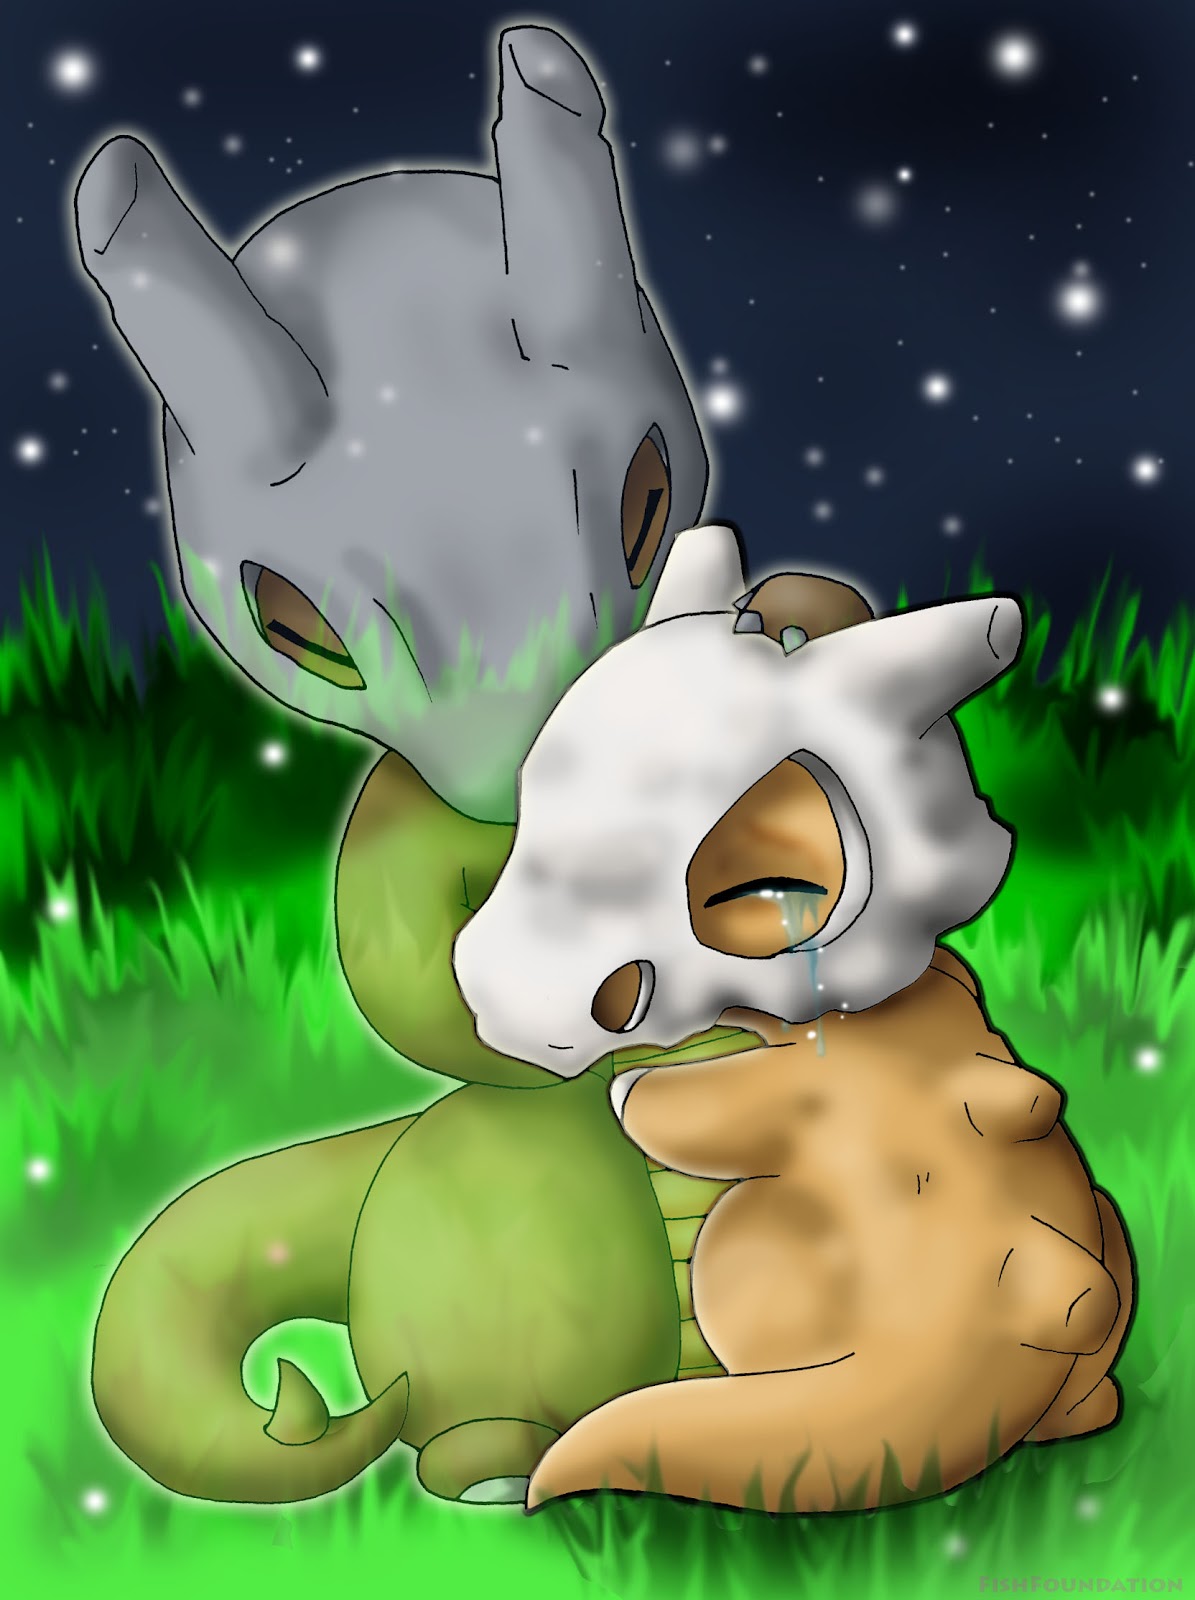 The+ghost+in+Pokemon+Tower+is+Cubone+s+mother.+The+_1817022001d0de5646fc13111cc037e1.jpg